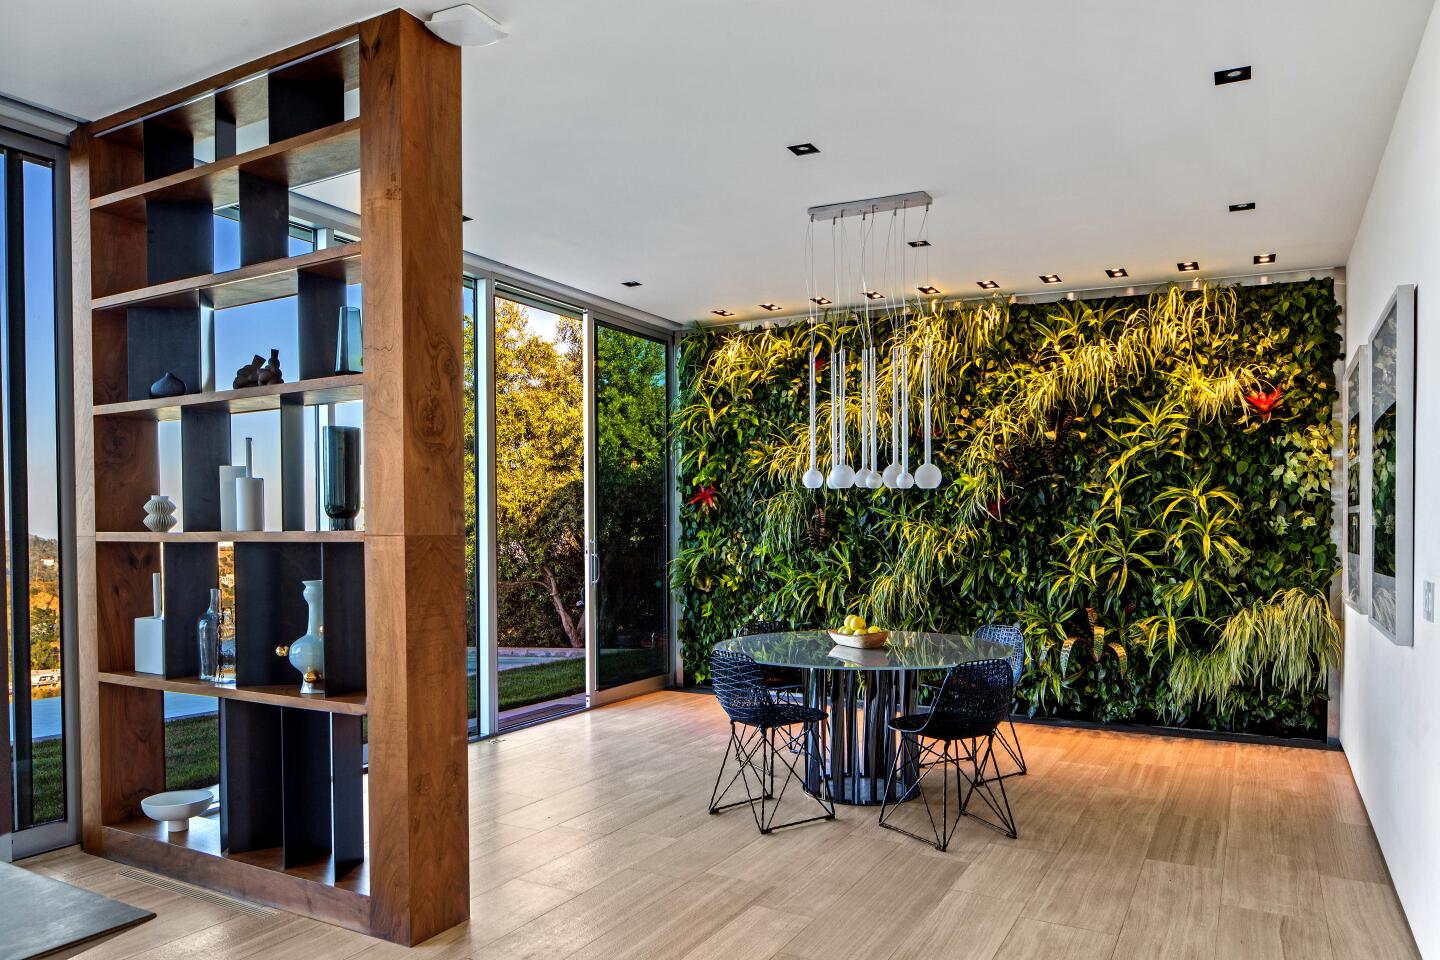 The dramatic Hollywood Hills home of musician Pharrell was designed by Hagy Belzberg and completed in 2007. Set atop a ridge, the modern showplace features an open-concept floor plan, walls of glass and a minimalist-vibe kitchen.